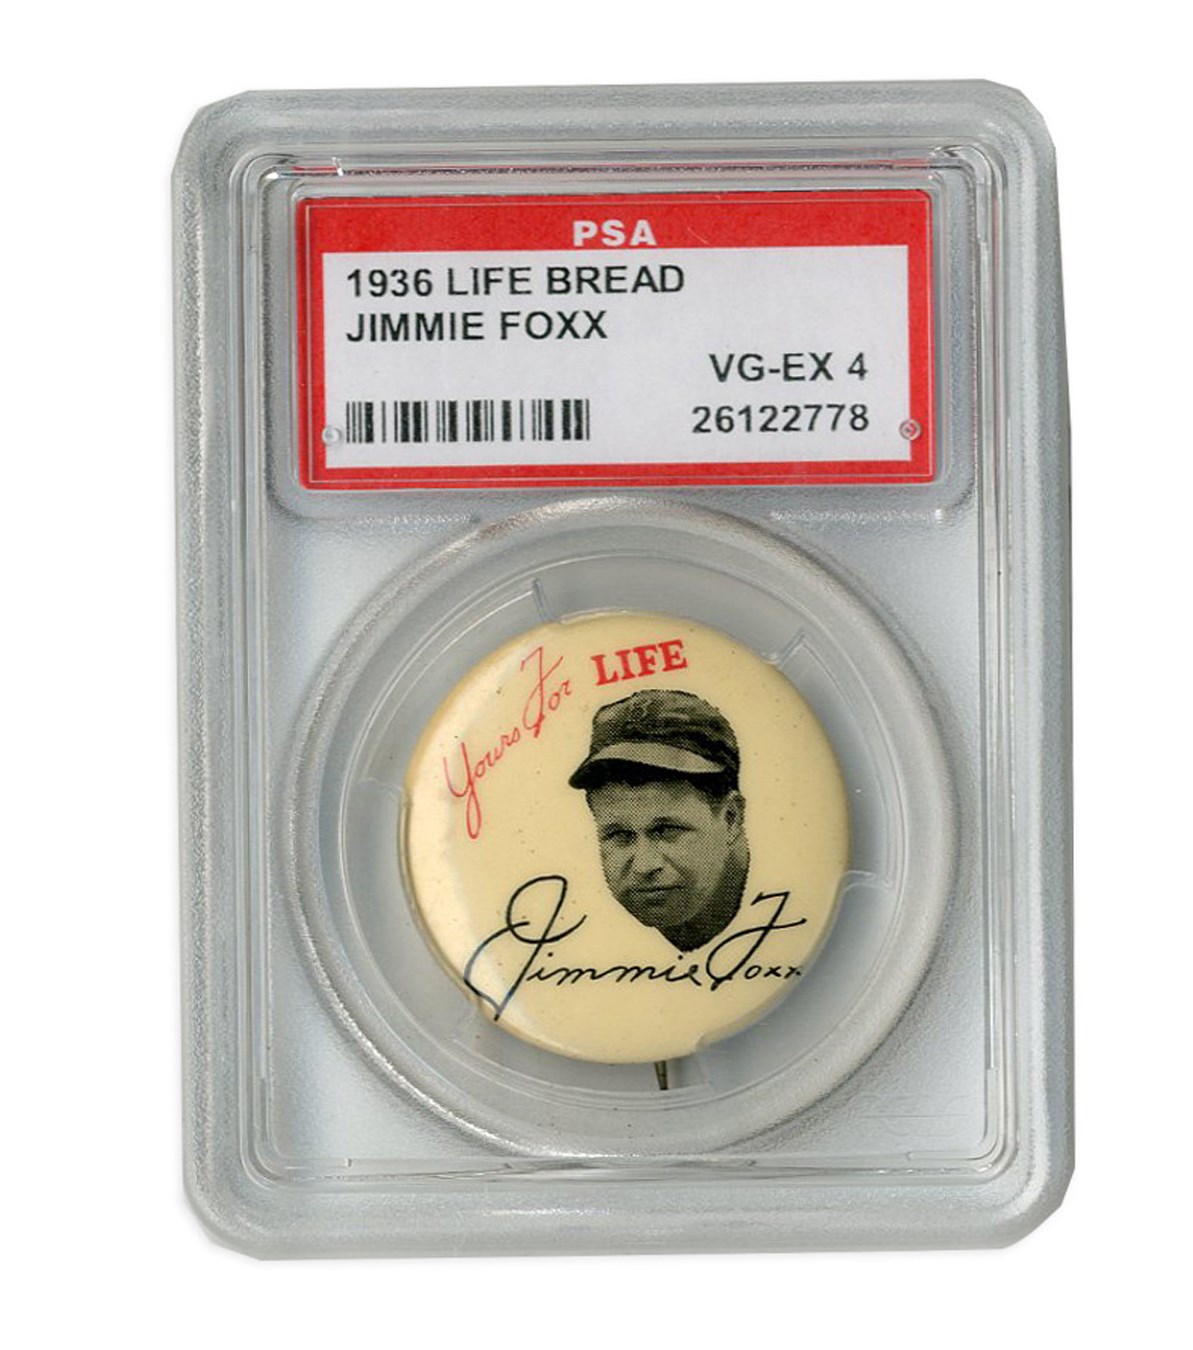 - 1936 Life Bread Jimmie Foxx "Yours For Life" Pin PSA VG-EX 4